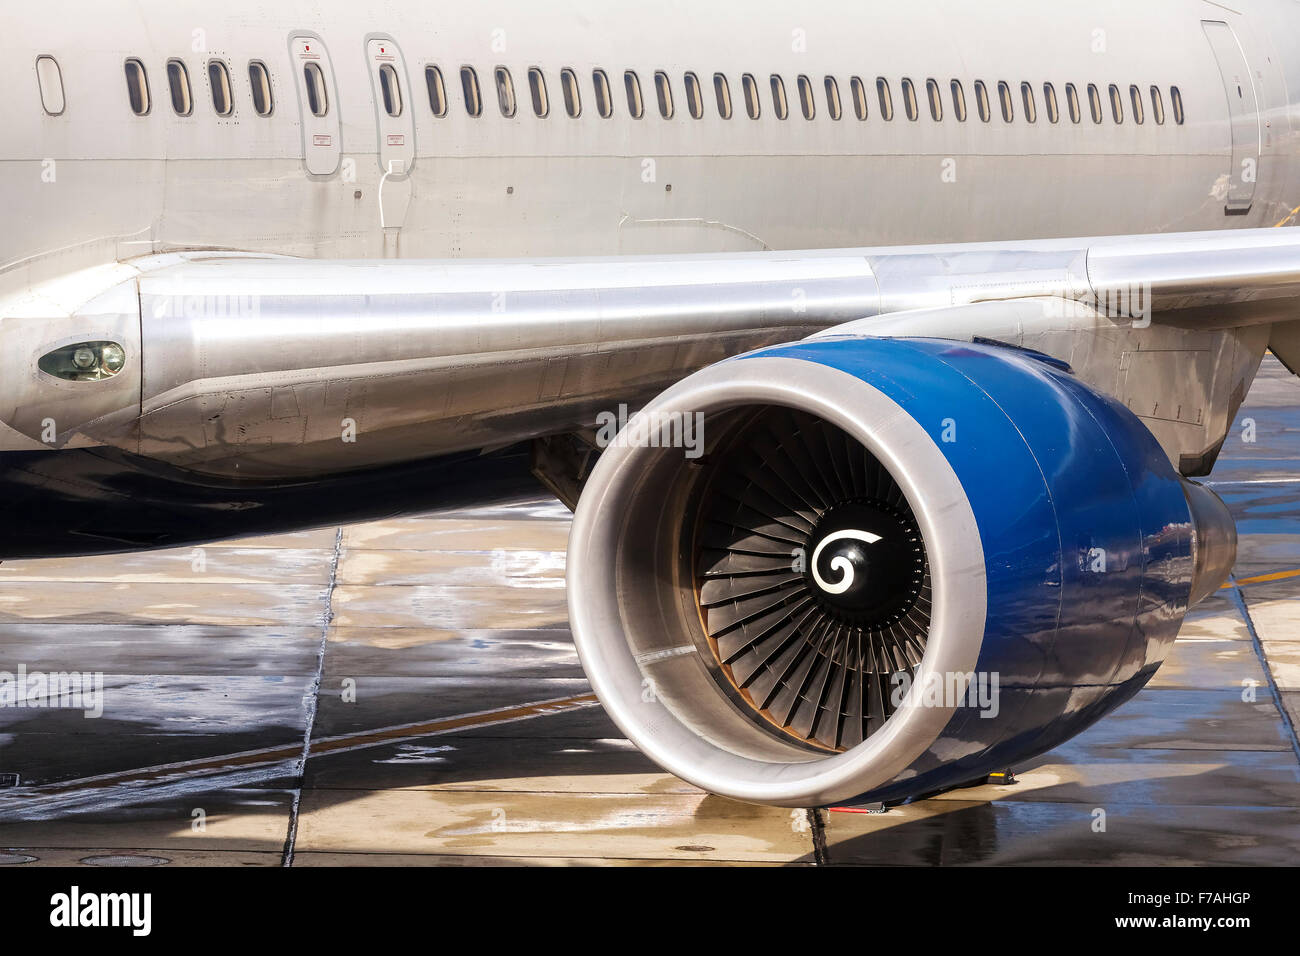 Close up picture of an engine of a passenger airplane. Stock Photo